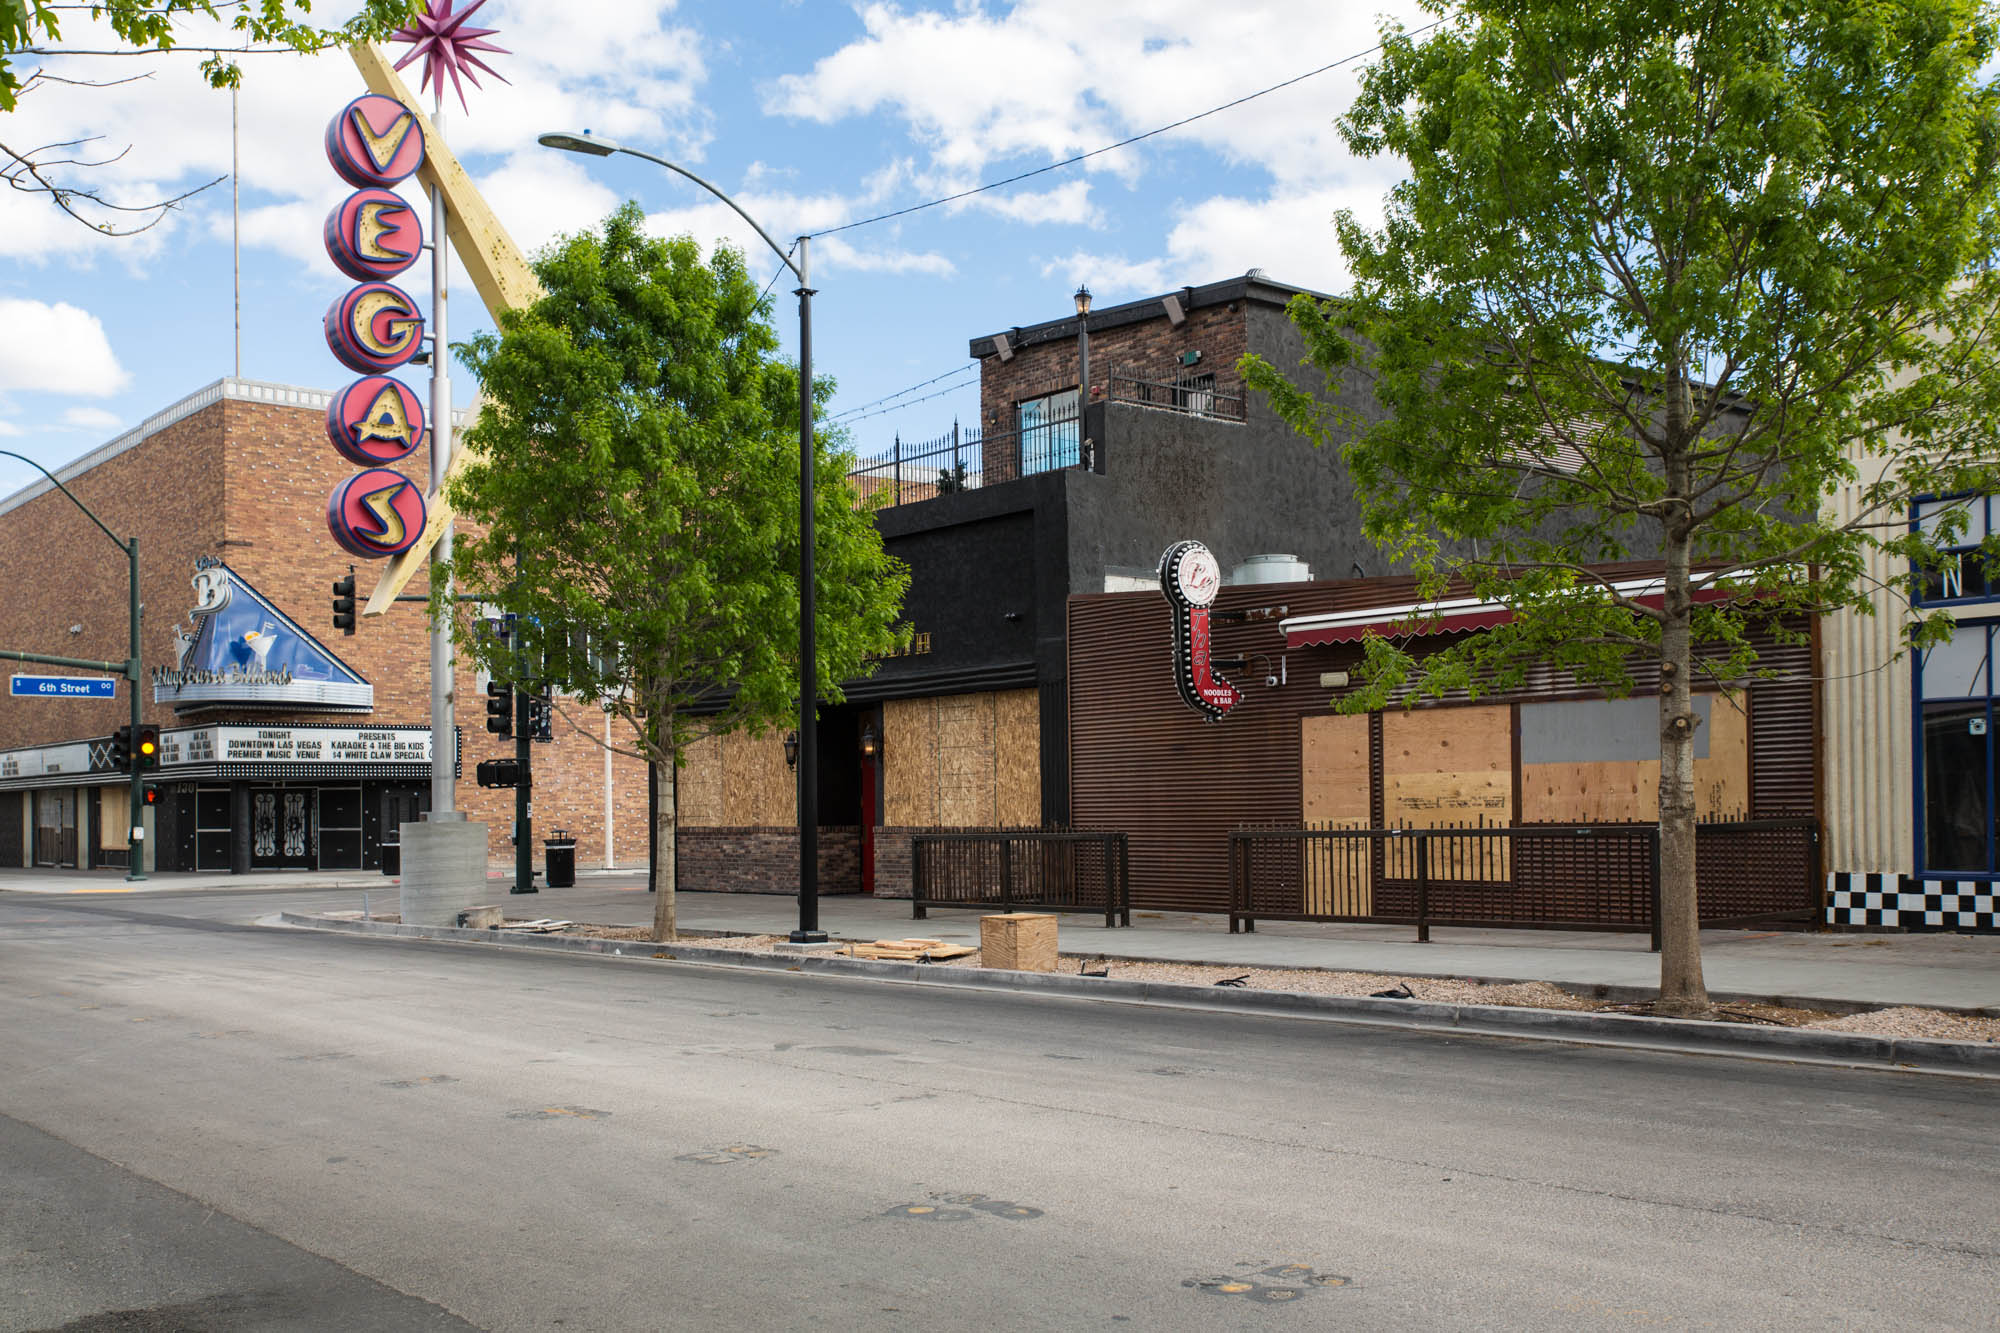 Bars and restaurants such as Commonwealth and Le Thai boarded up their windows when they closed due to the mandatory shutdown of nonessential businesses in Nevada.